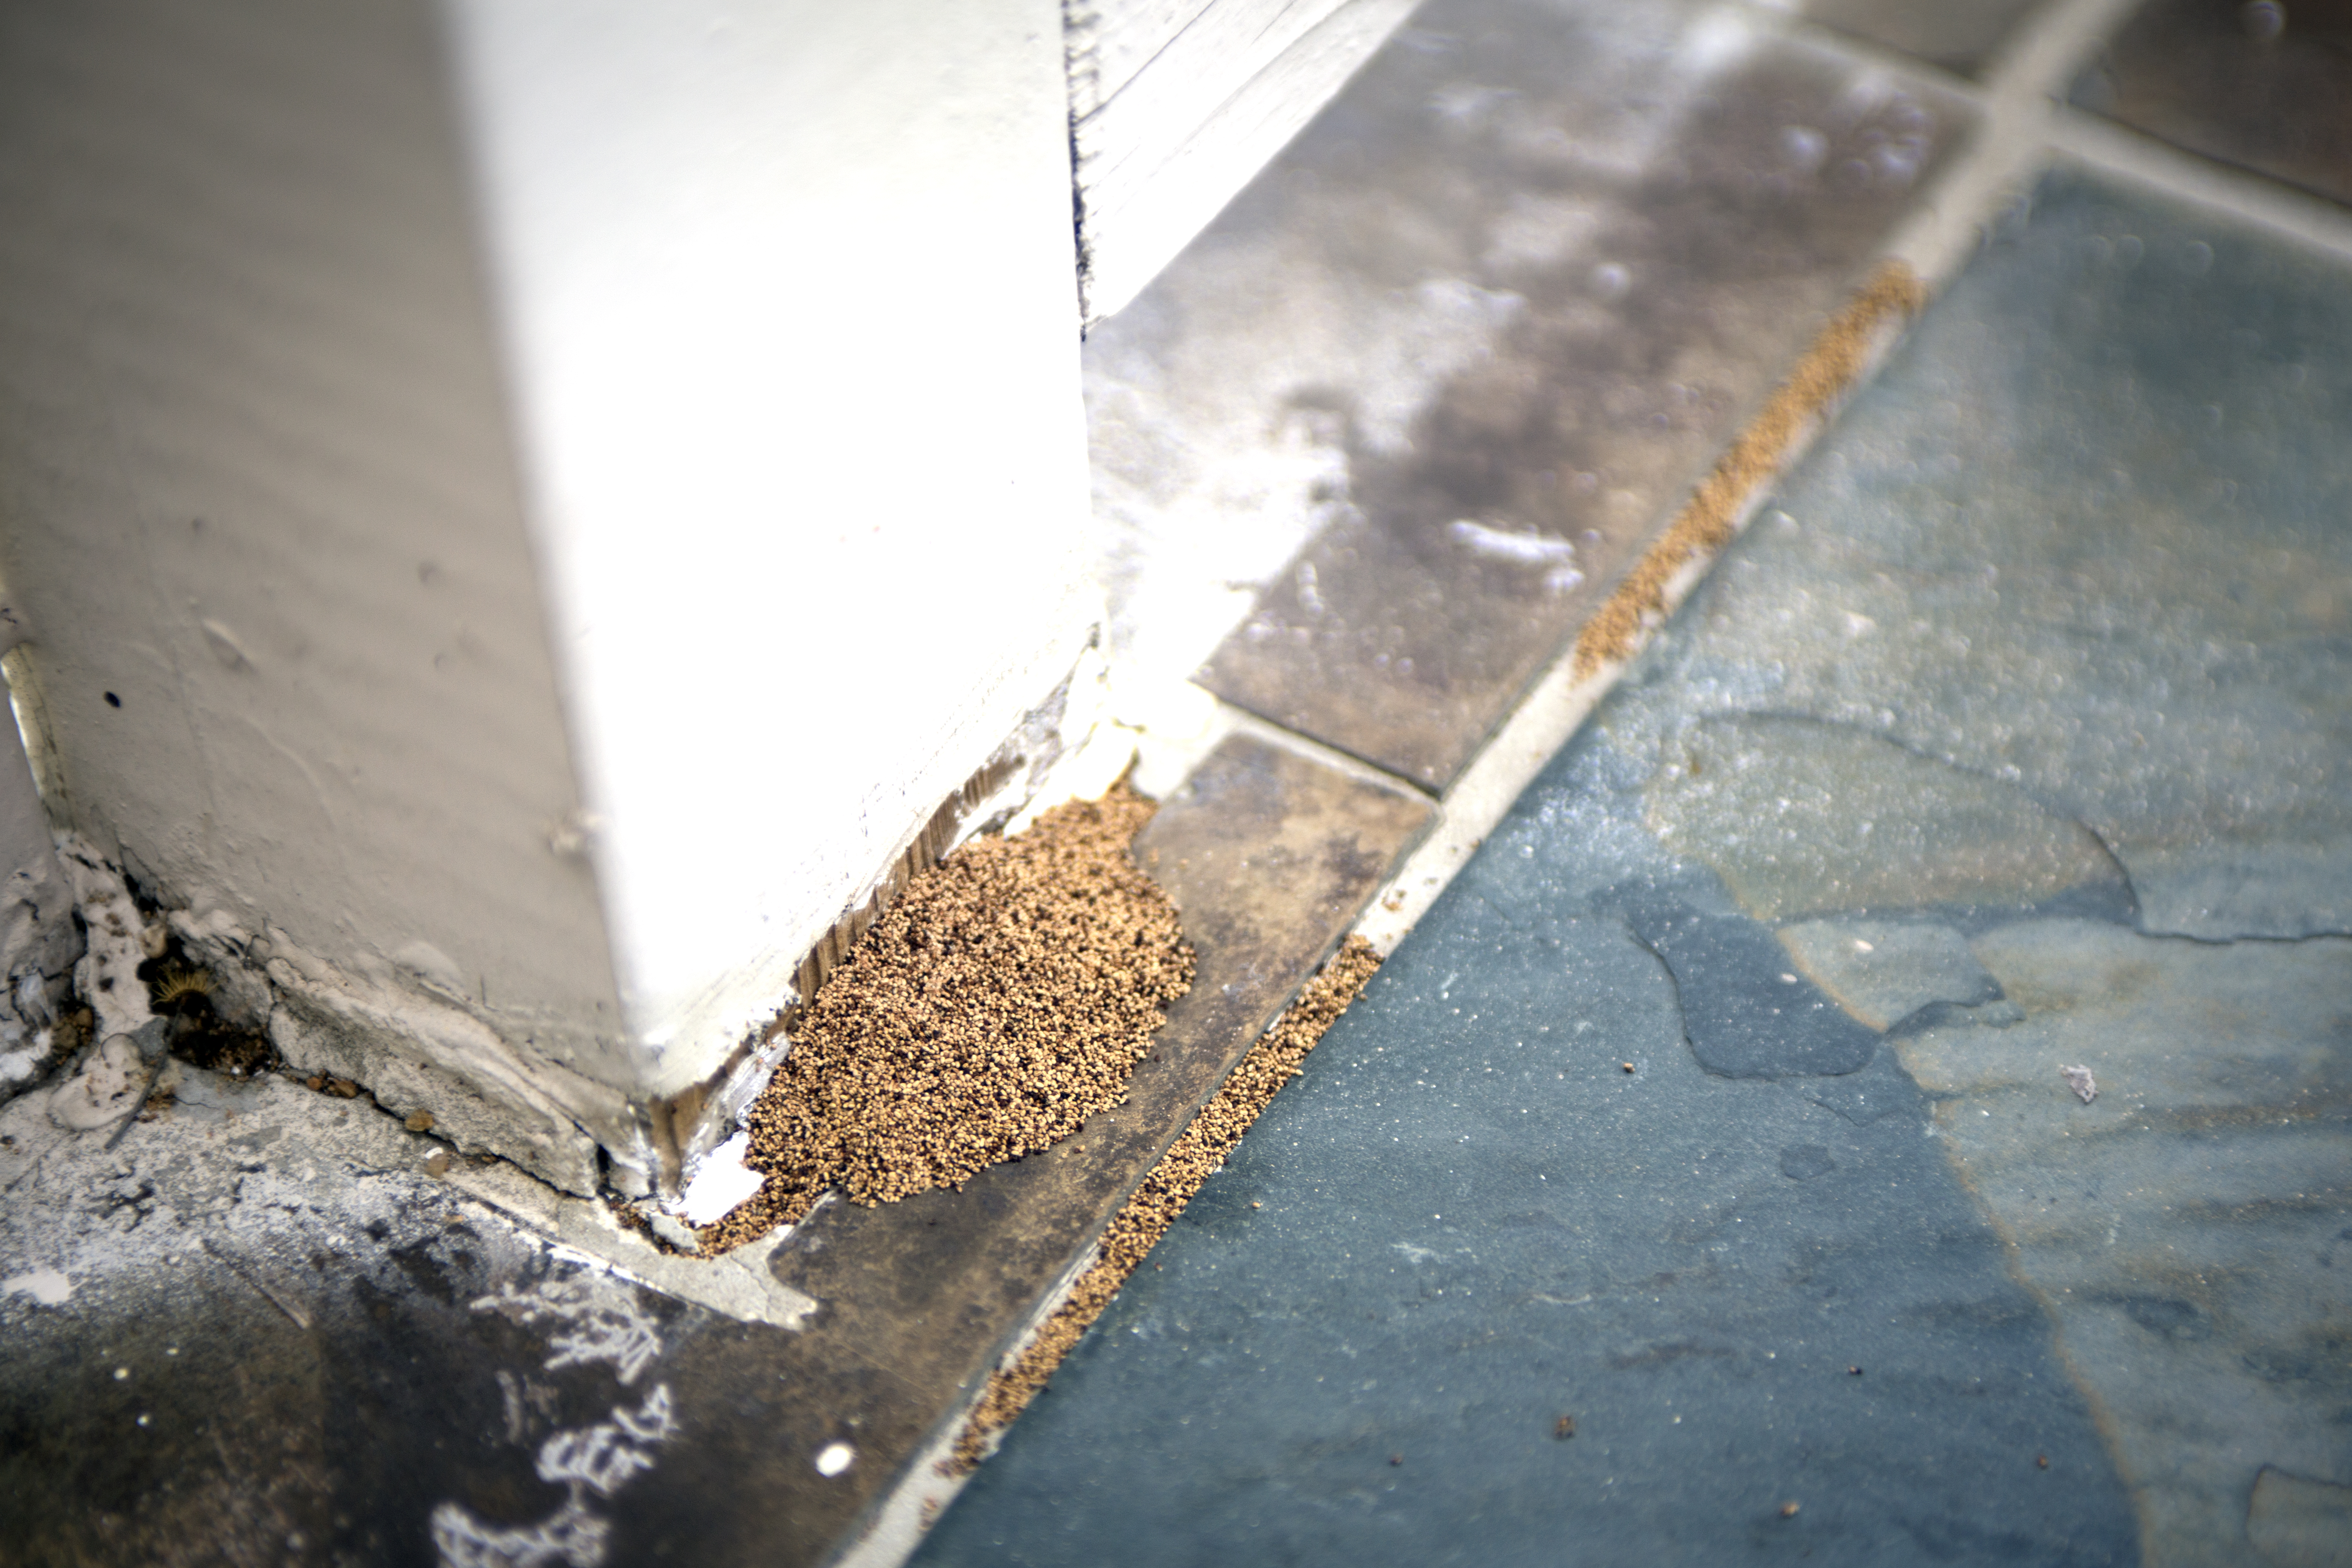 Have Your Tampa Home Inspected For Termites With Binghams Pest Management Call 727-323-8866